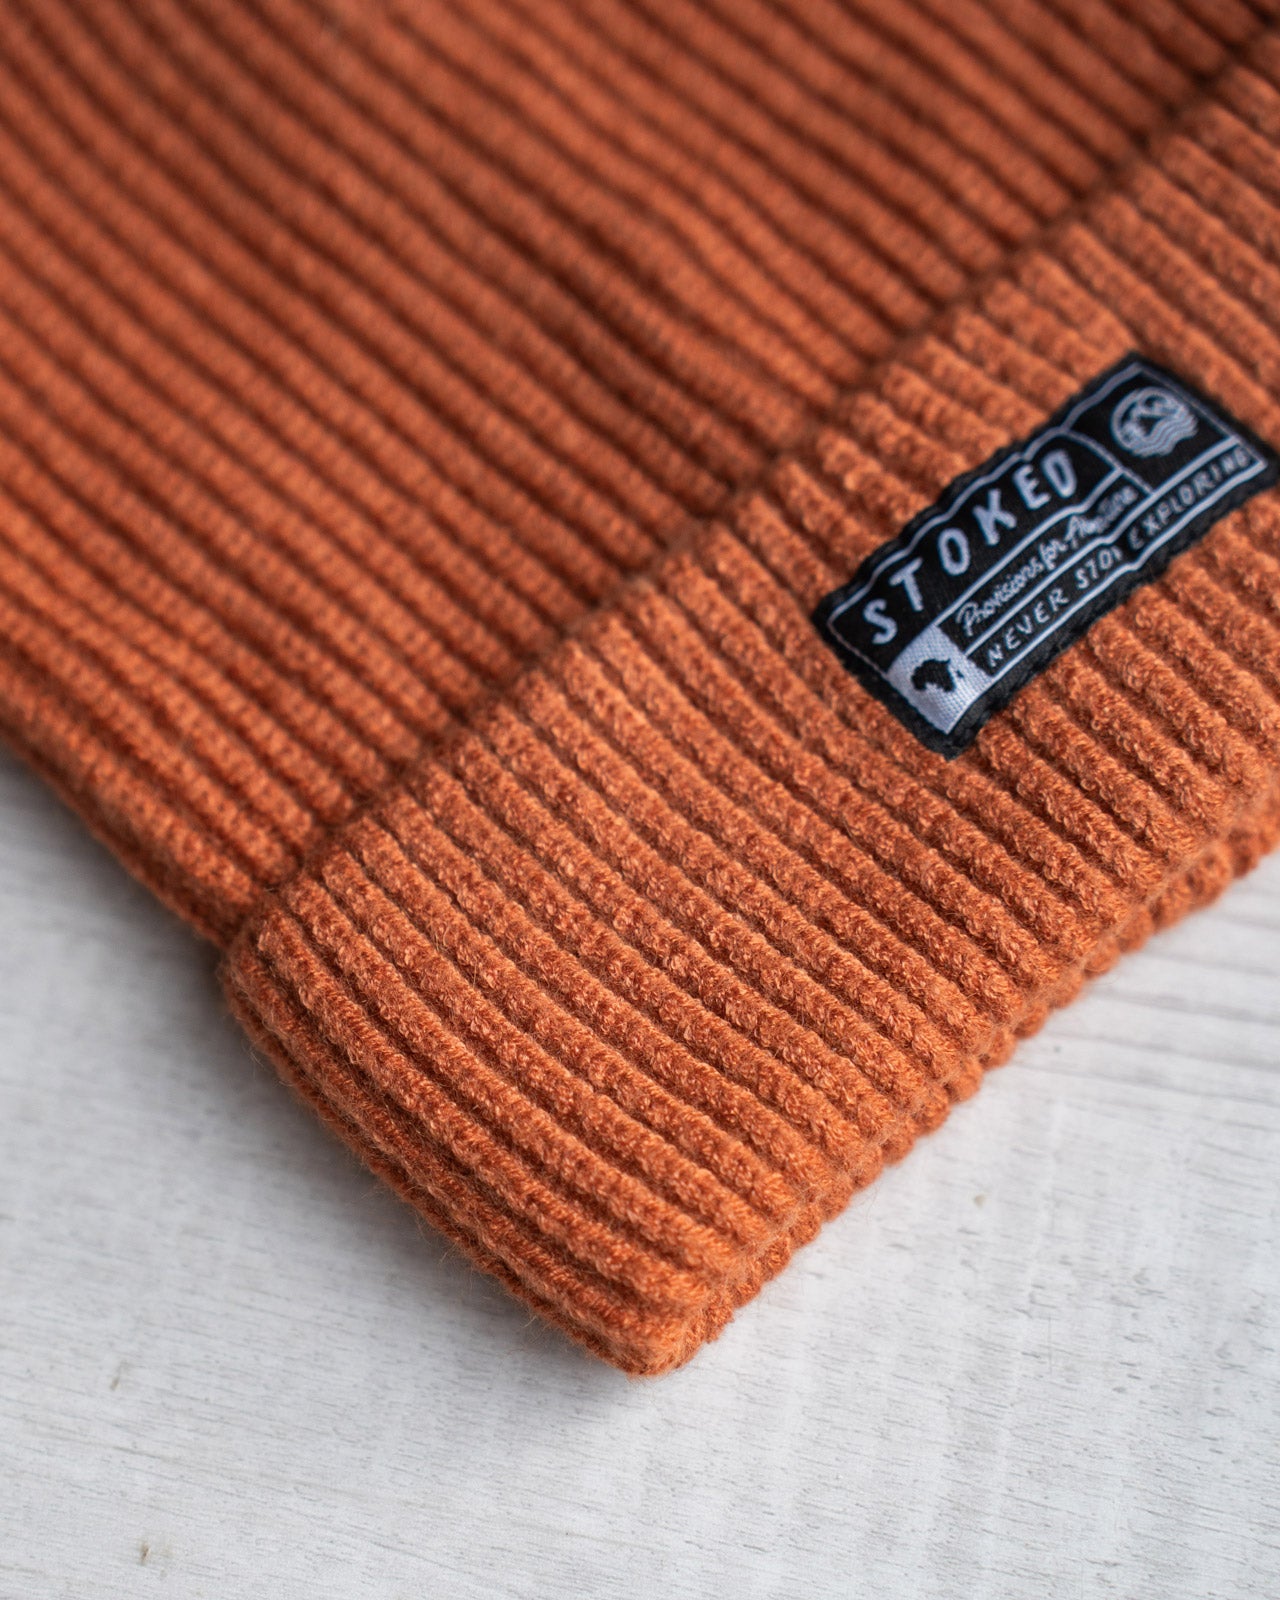 The Nomad Beanie - Dusk Orange - Stokedthebrand. Lifestyle products for outdoor adventures. Made in South Africa